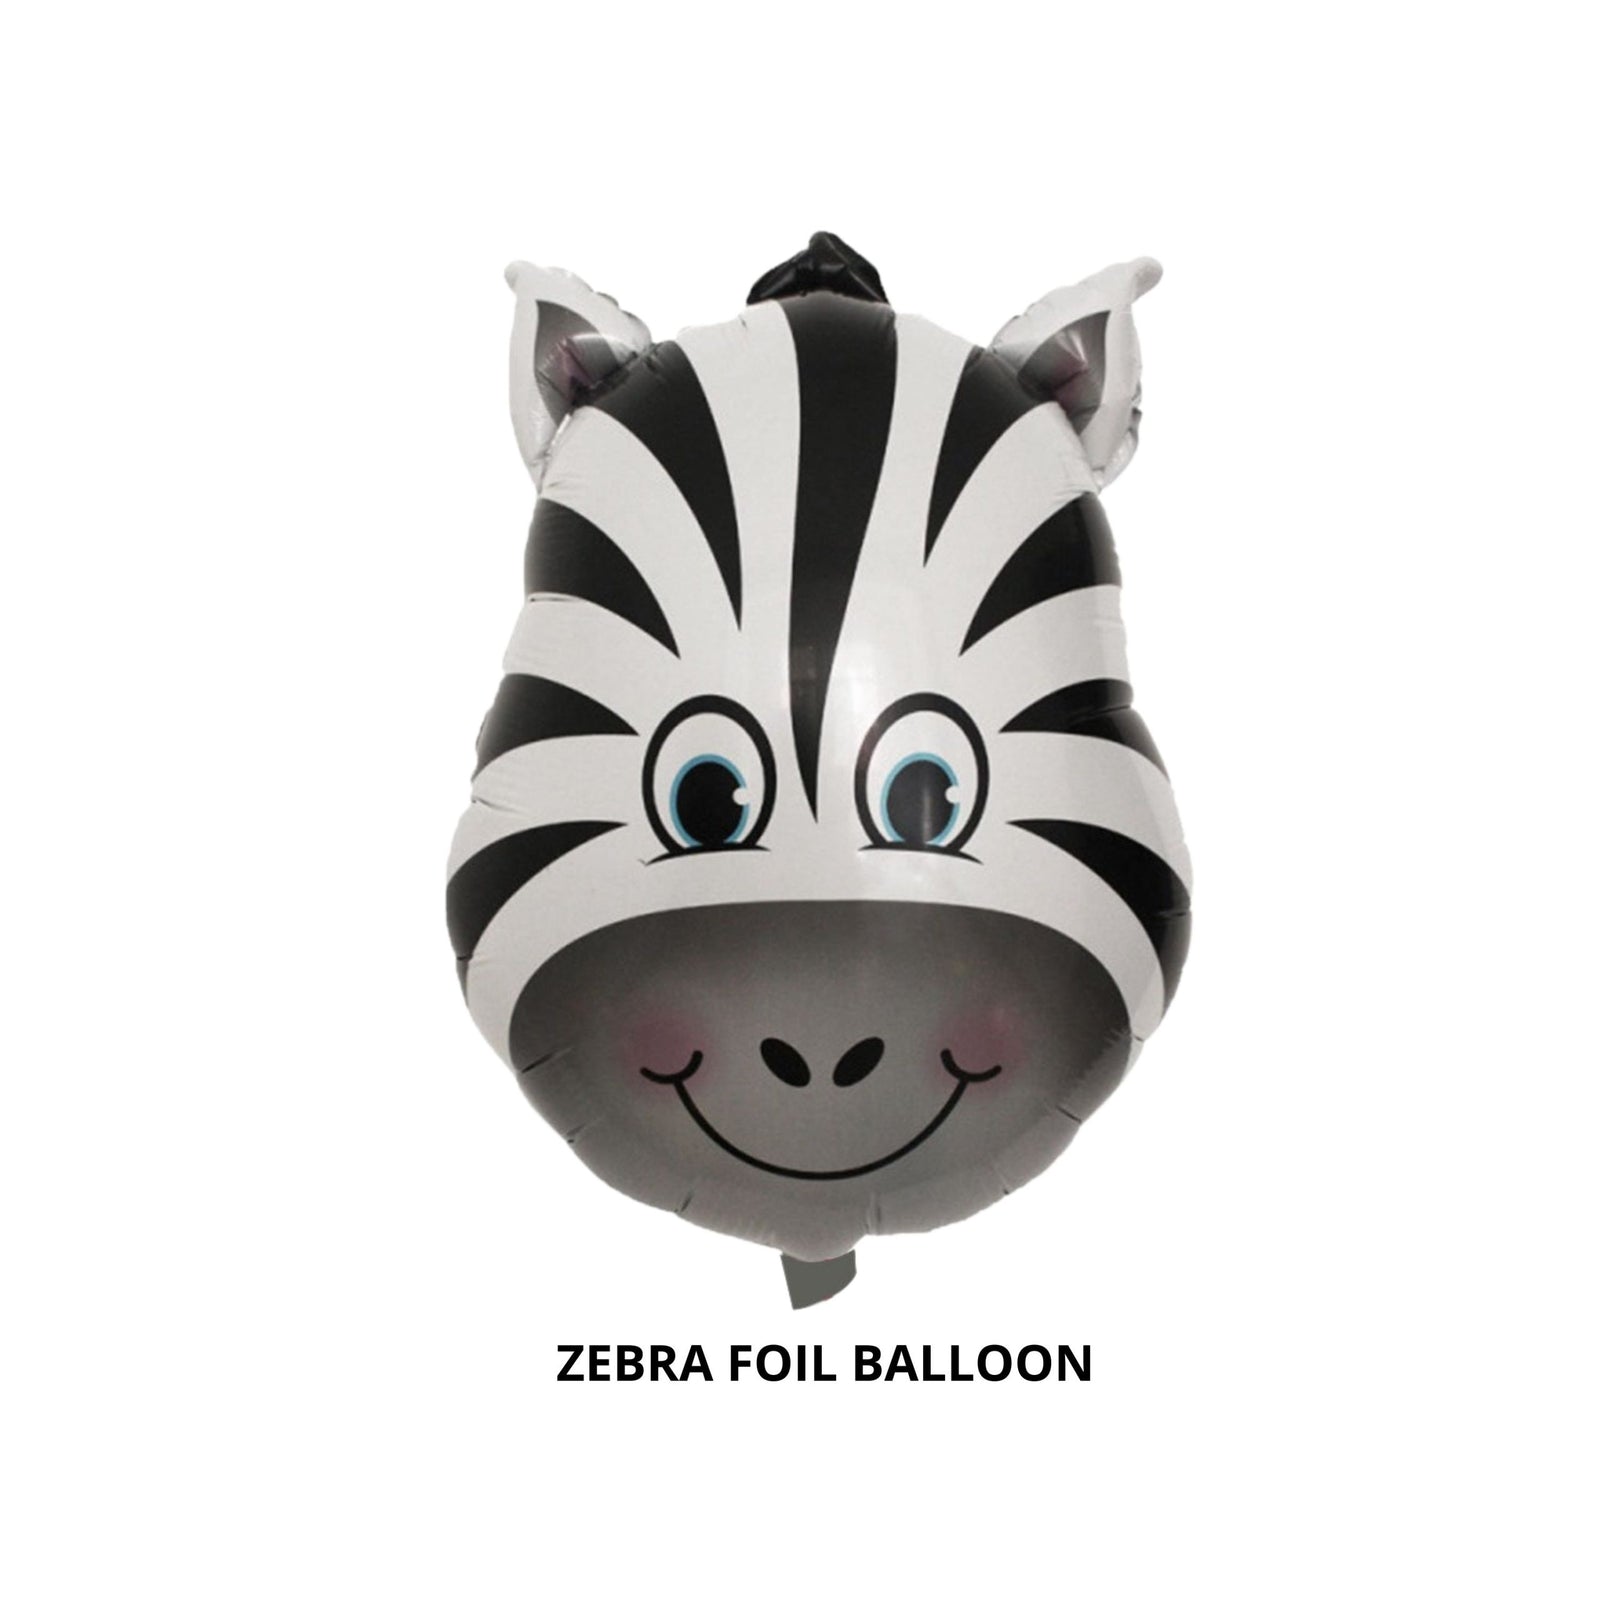 Animal Face Shaped Foil Balloon for Kids Birthday Party, Animal Theme, Zoo Party Decoration- Pack of 1 (Zebra)